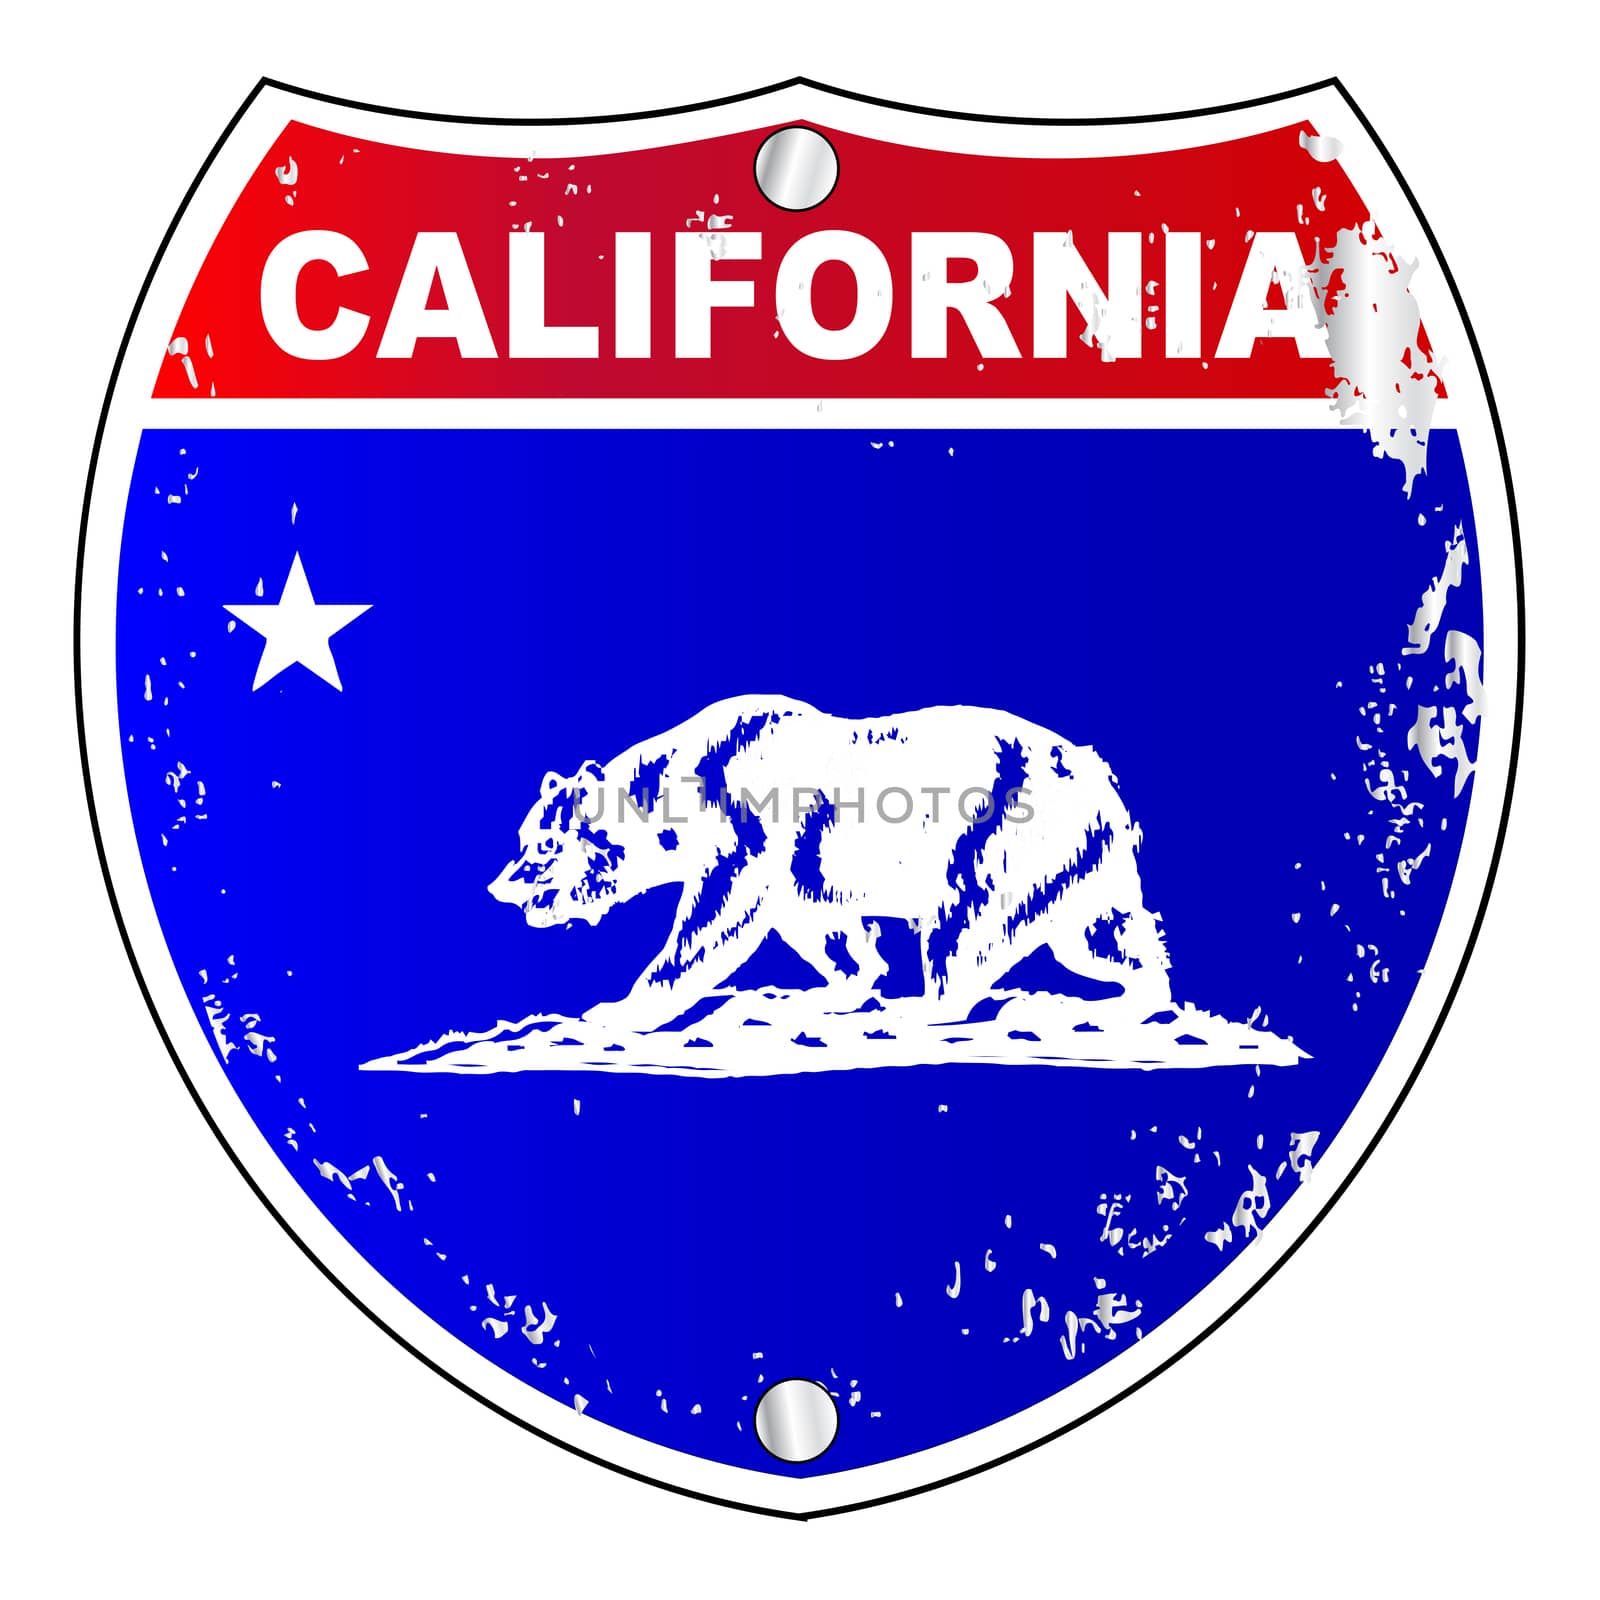 California interstate sign with flag cross over a white background